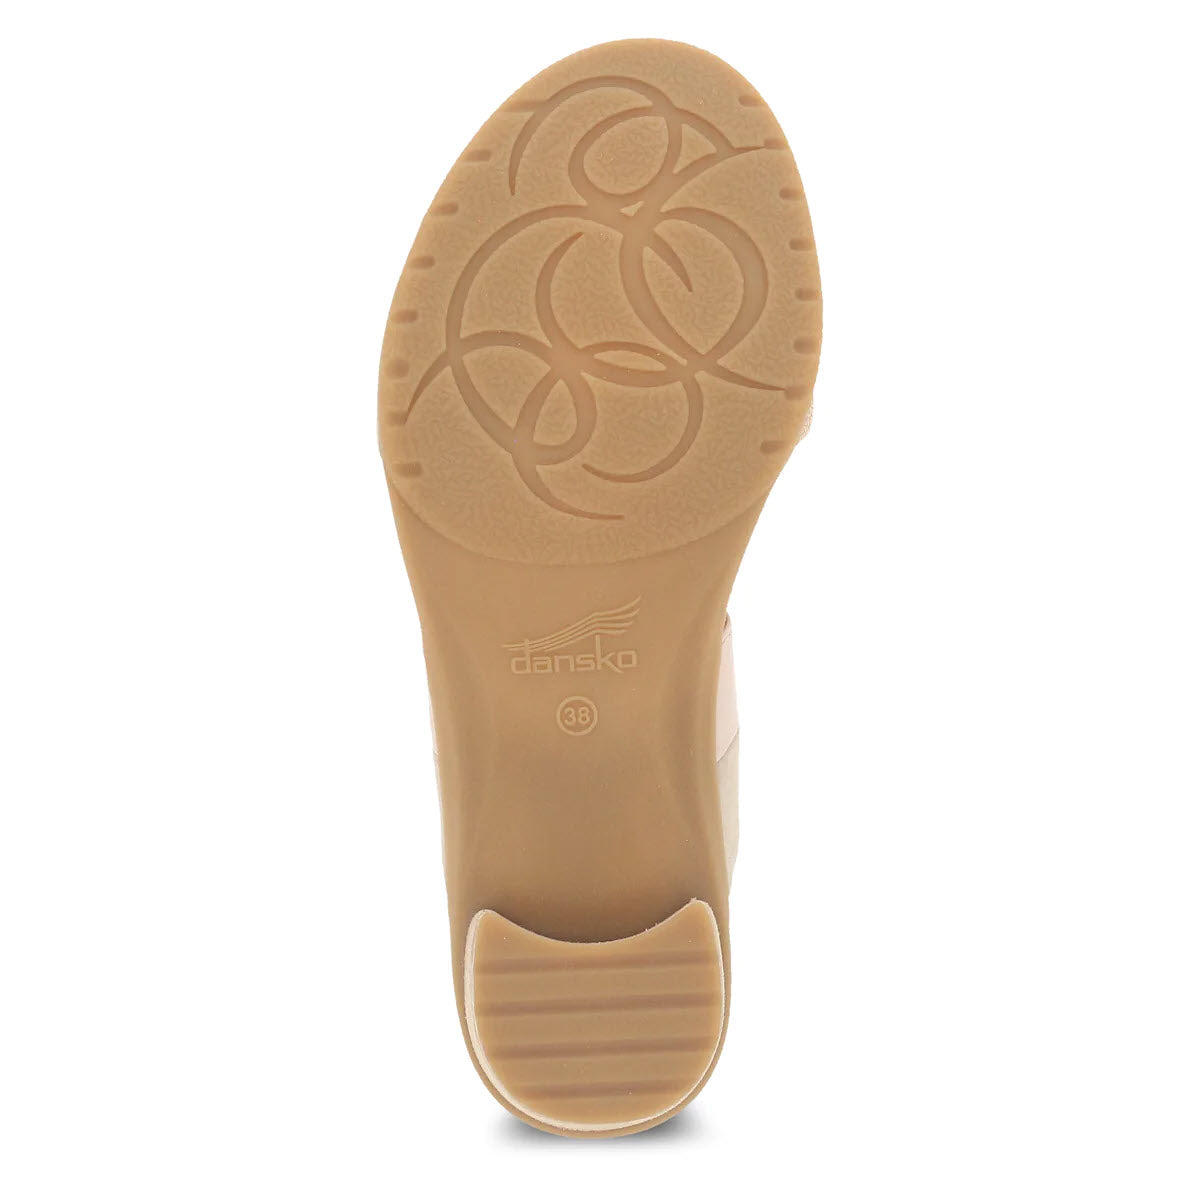 Sole of a Dansko beige shoe displaying a circular tread pattern and the Dansko logo, perfect for an anytime heel.